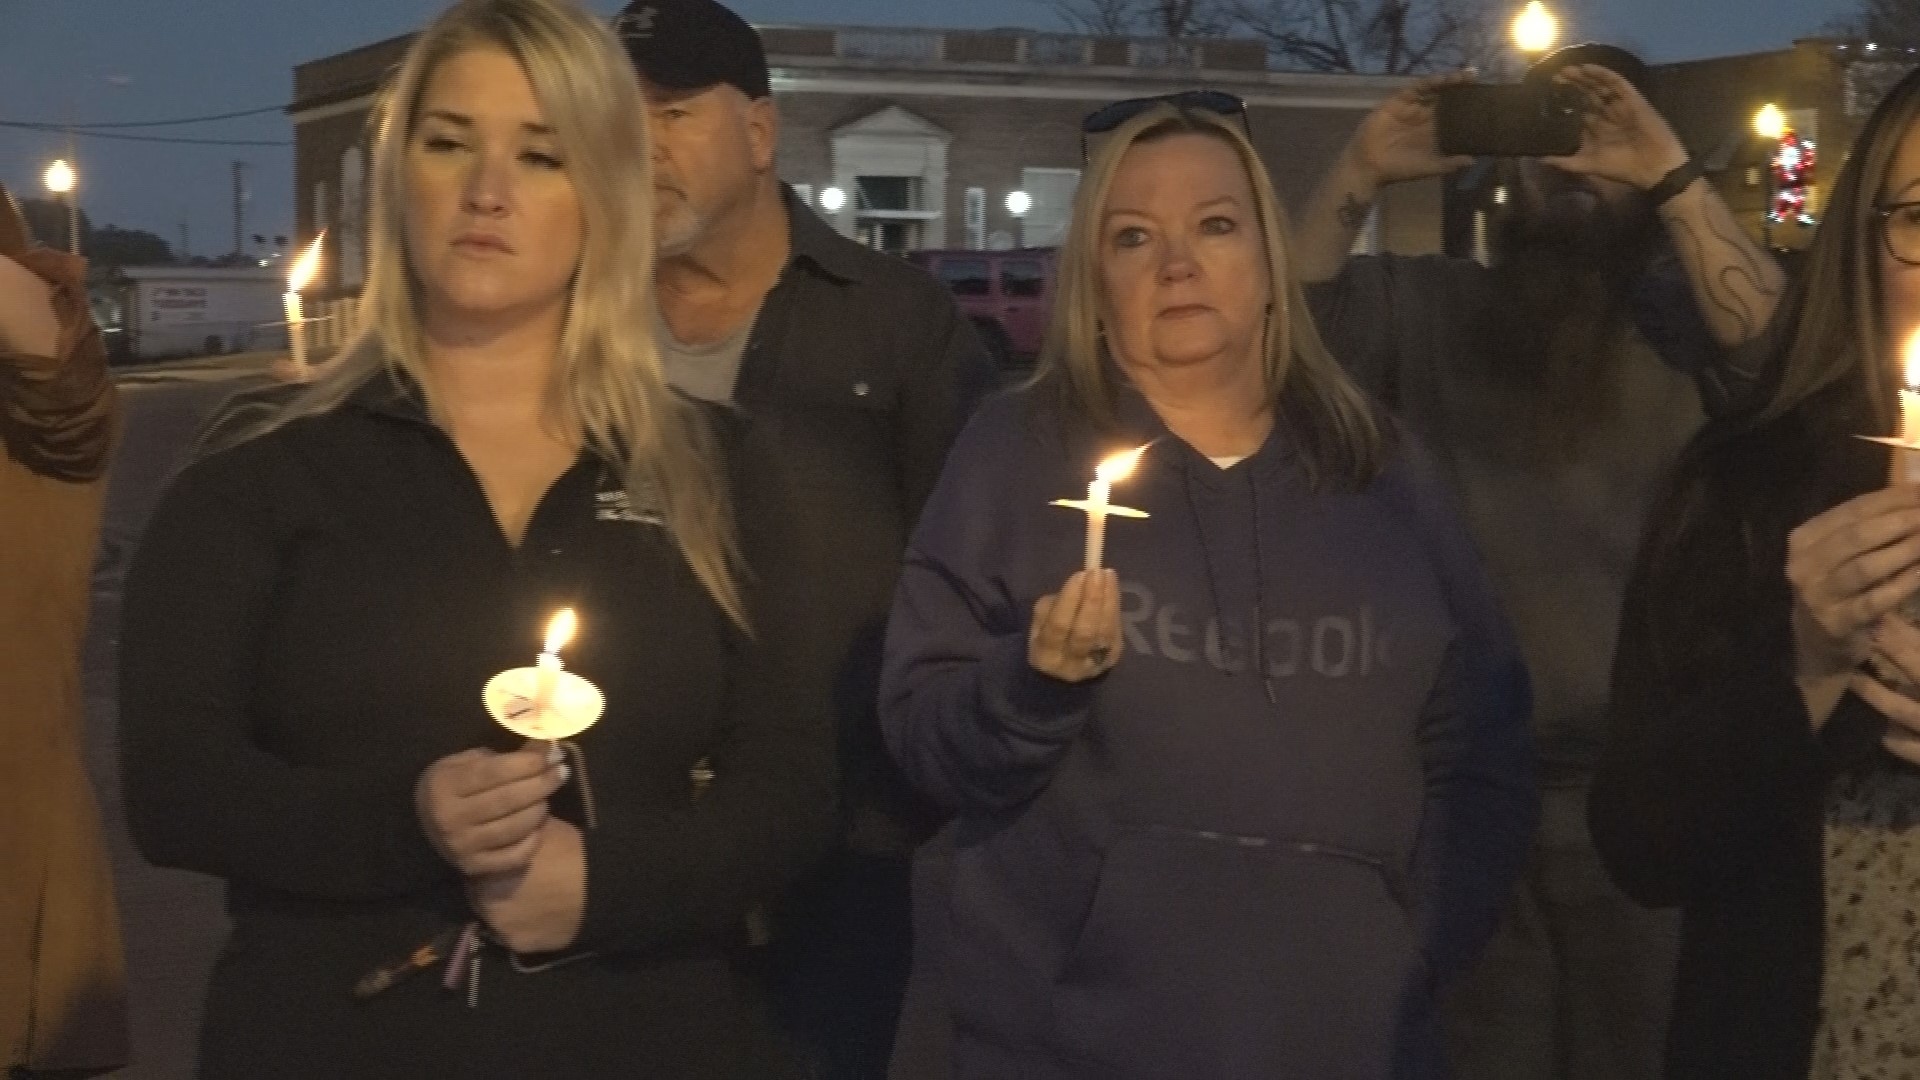 Friends and family held a candlelit vigil in her honor Thursday night, hoping for answers